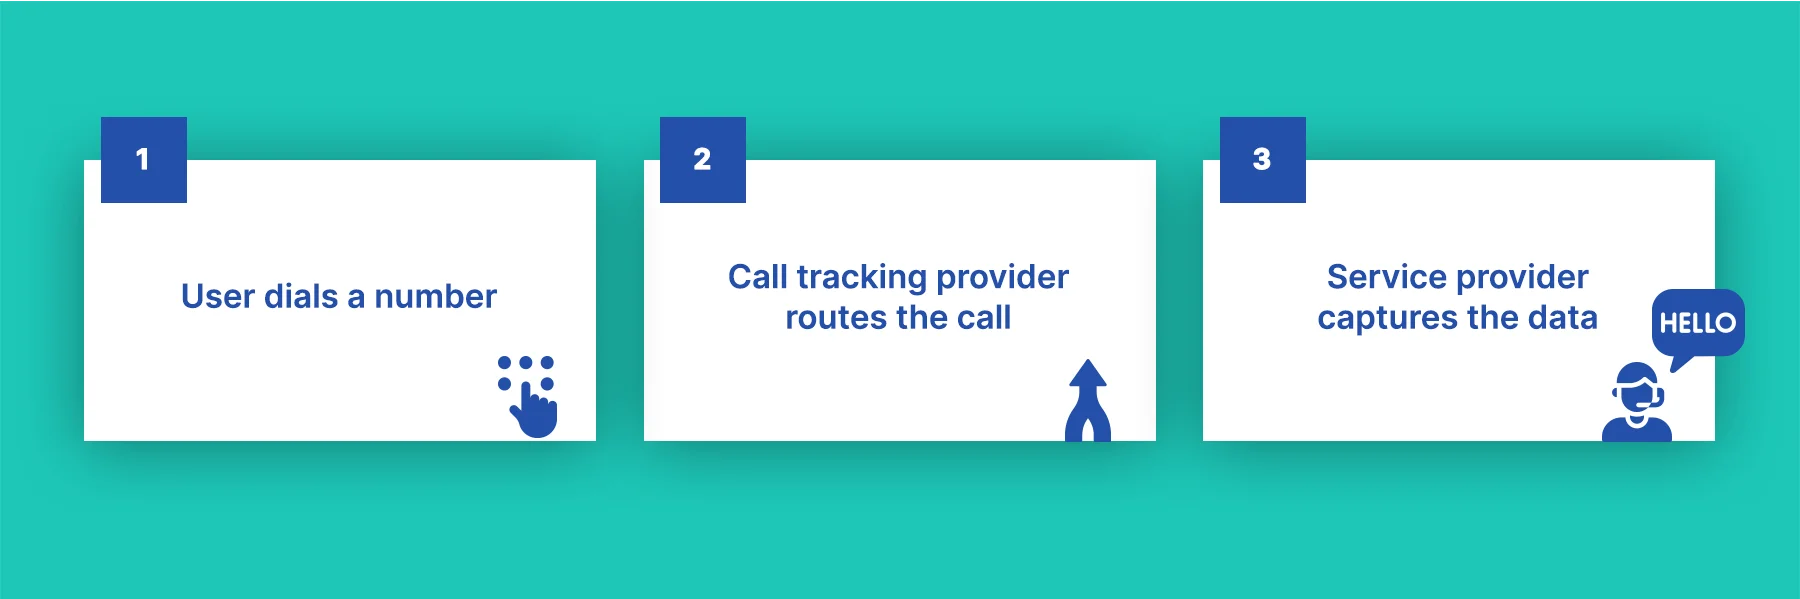 Steps of call tracking on a page